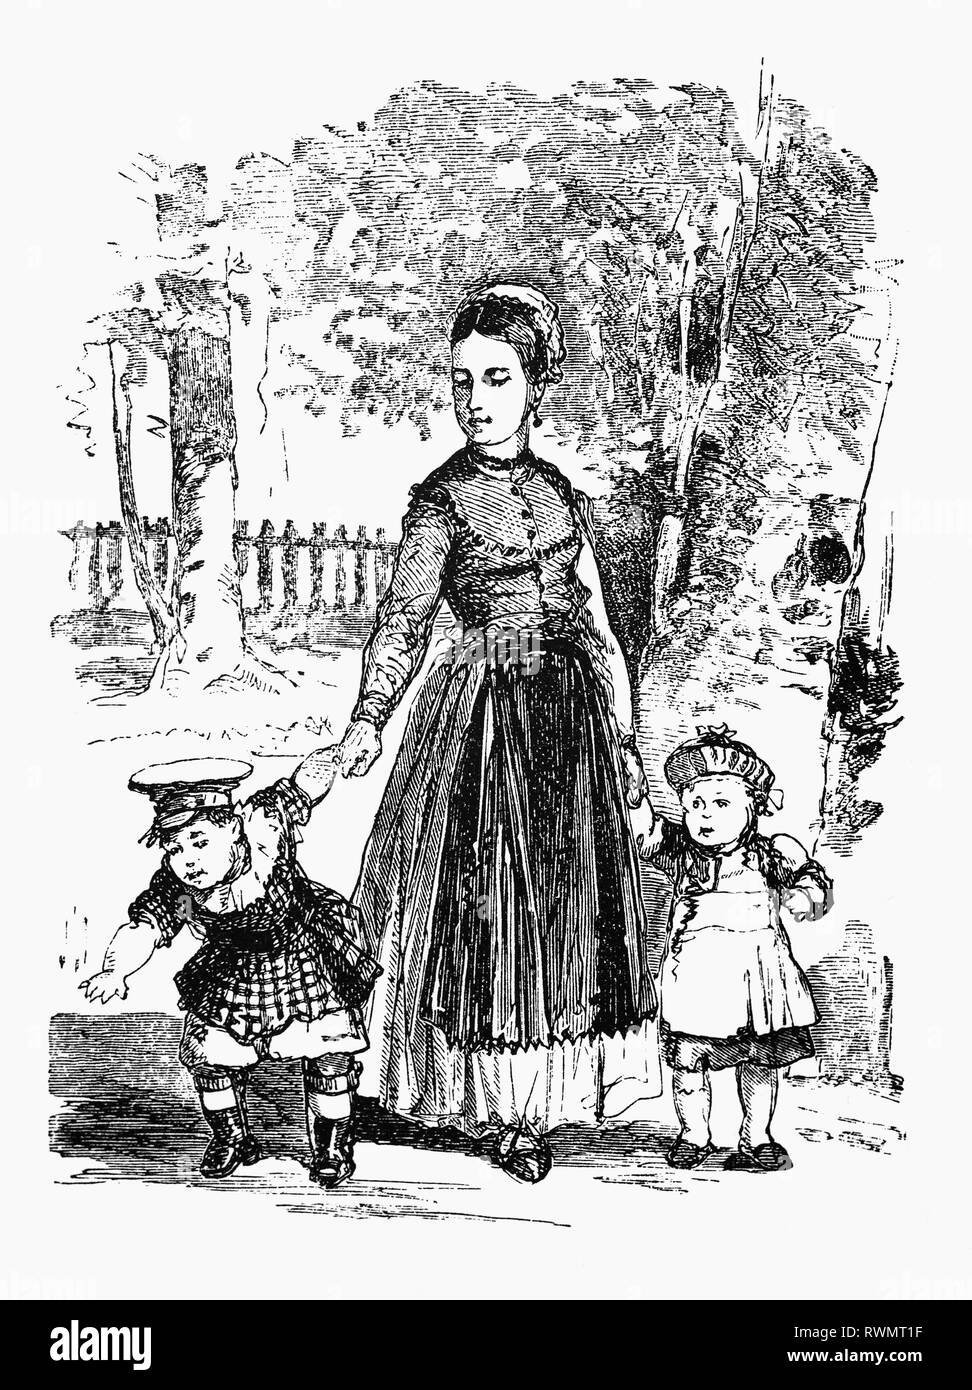 A  19th Century nursemaid with two children in her care in a park in Haarlem, The Netherlands.  From the Camera Obscura, a collection of Dutch humorous-realistic essays, stories and sketches in which Hildebrand, the author, takes an ironic look at the behavior of the 'well-to-do', finding  them bourgeois and without a good word for them. Stock Photo